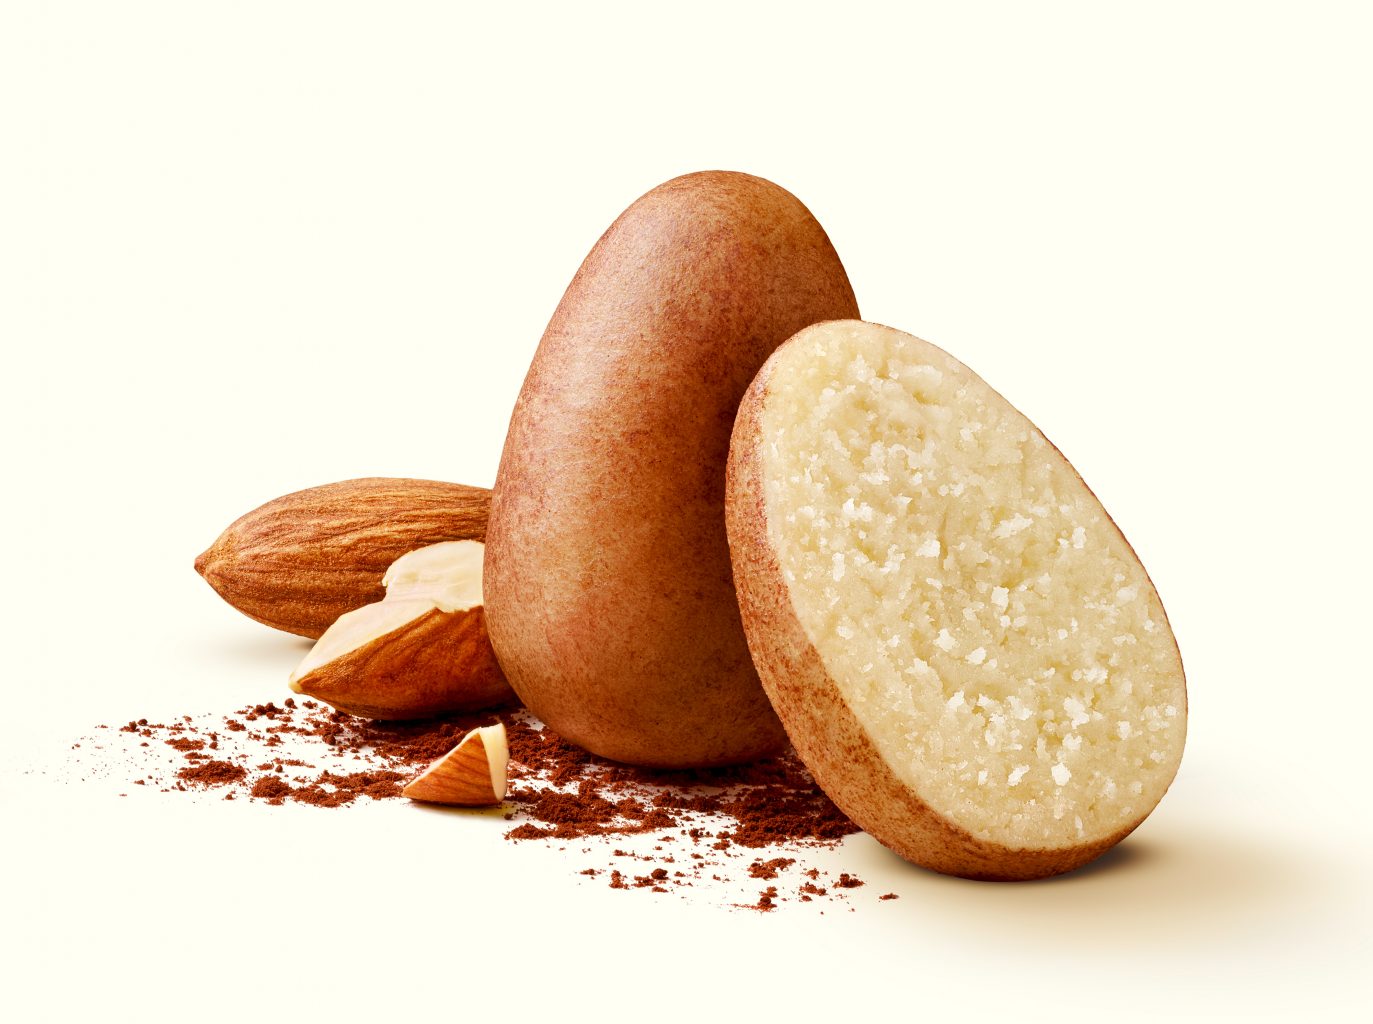 One whole and one half confectionery marzipan egg with two almonds on a beige background